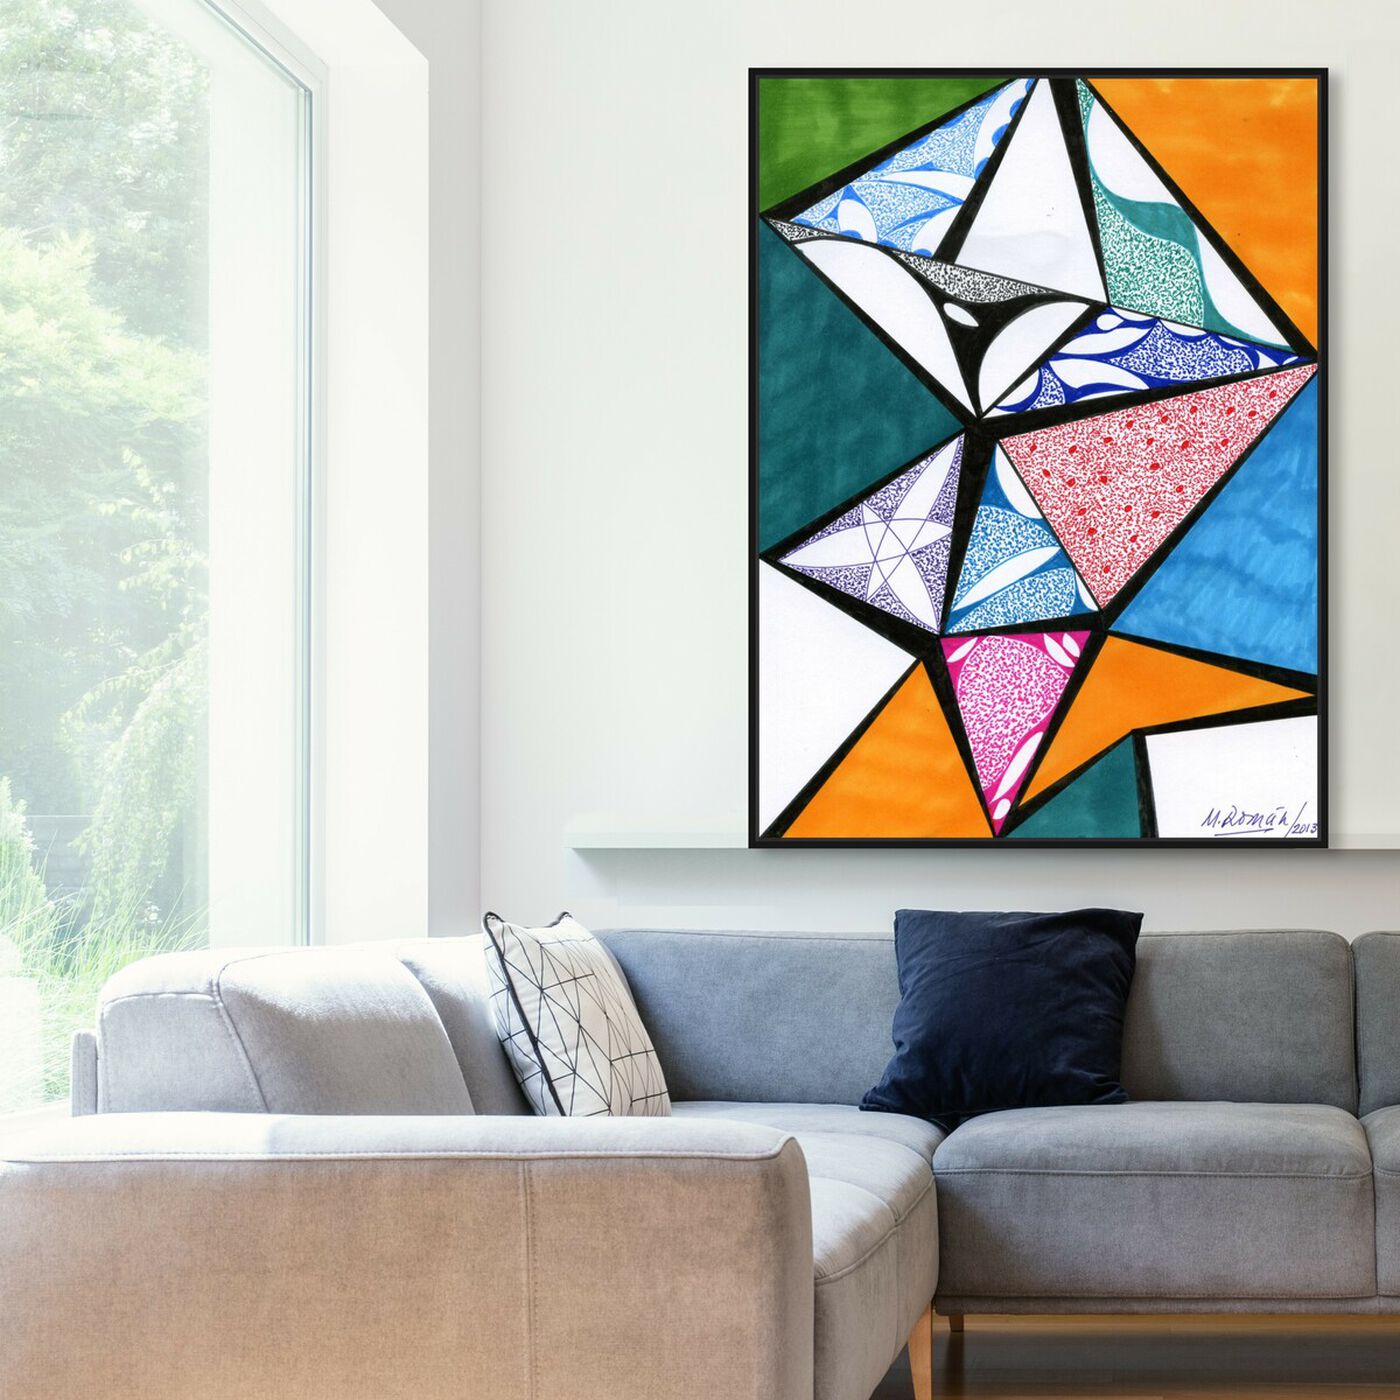 Hanging view of Divided featuring abstract and geometric art.